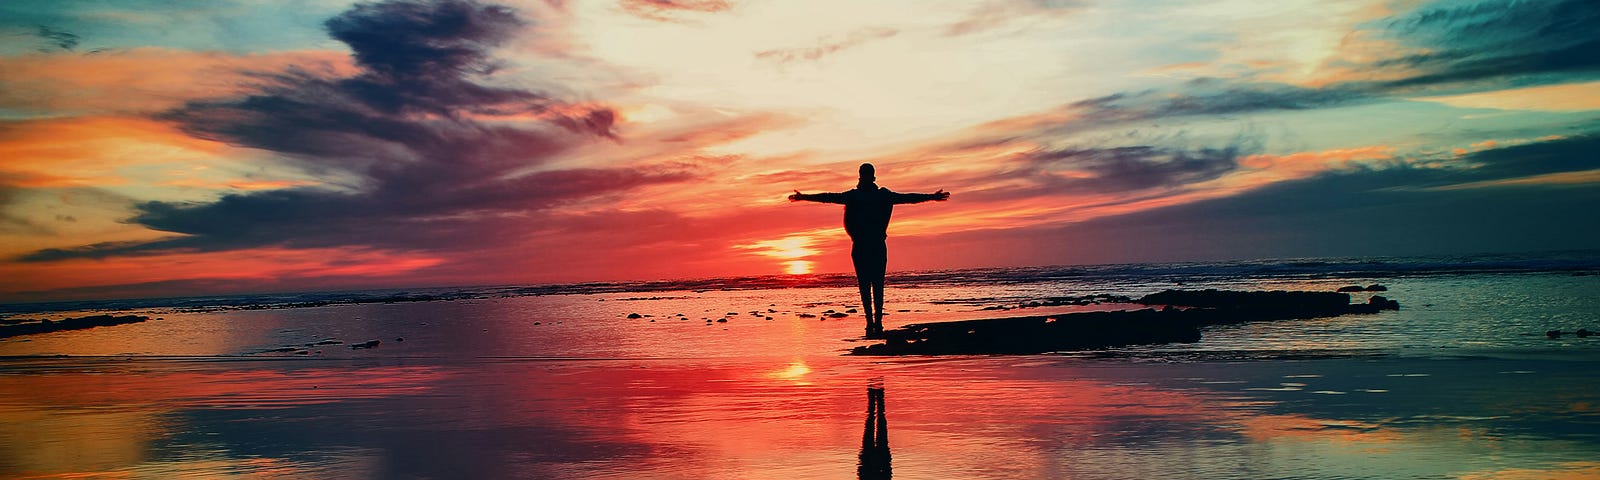 silhouette of person with outstretched arms against a sunset background